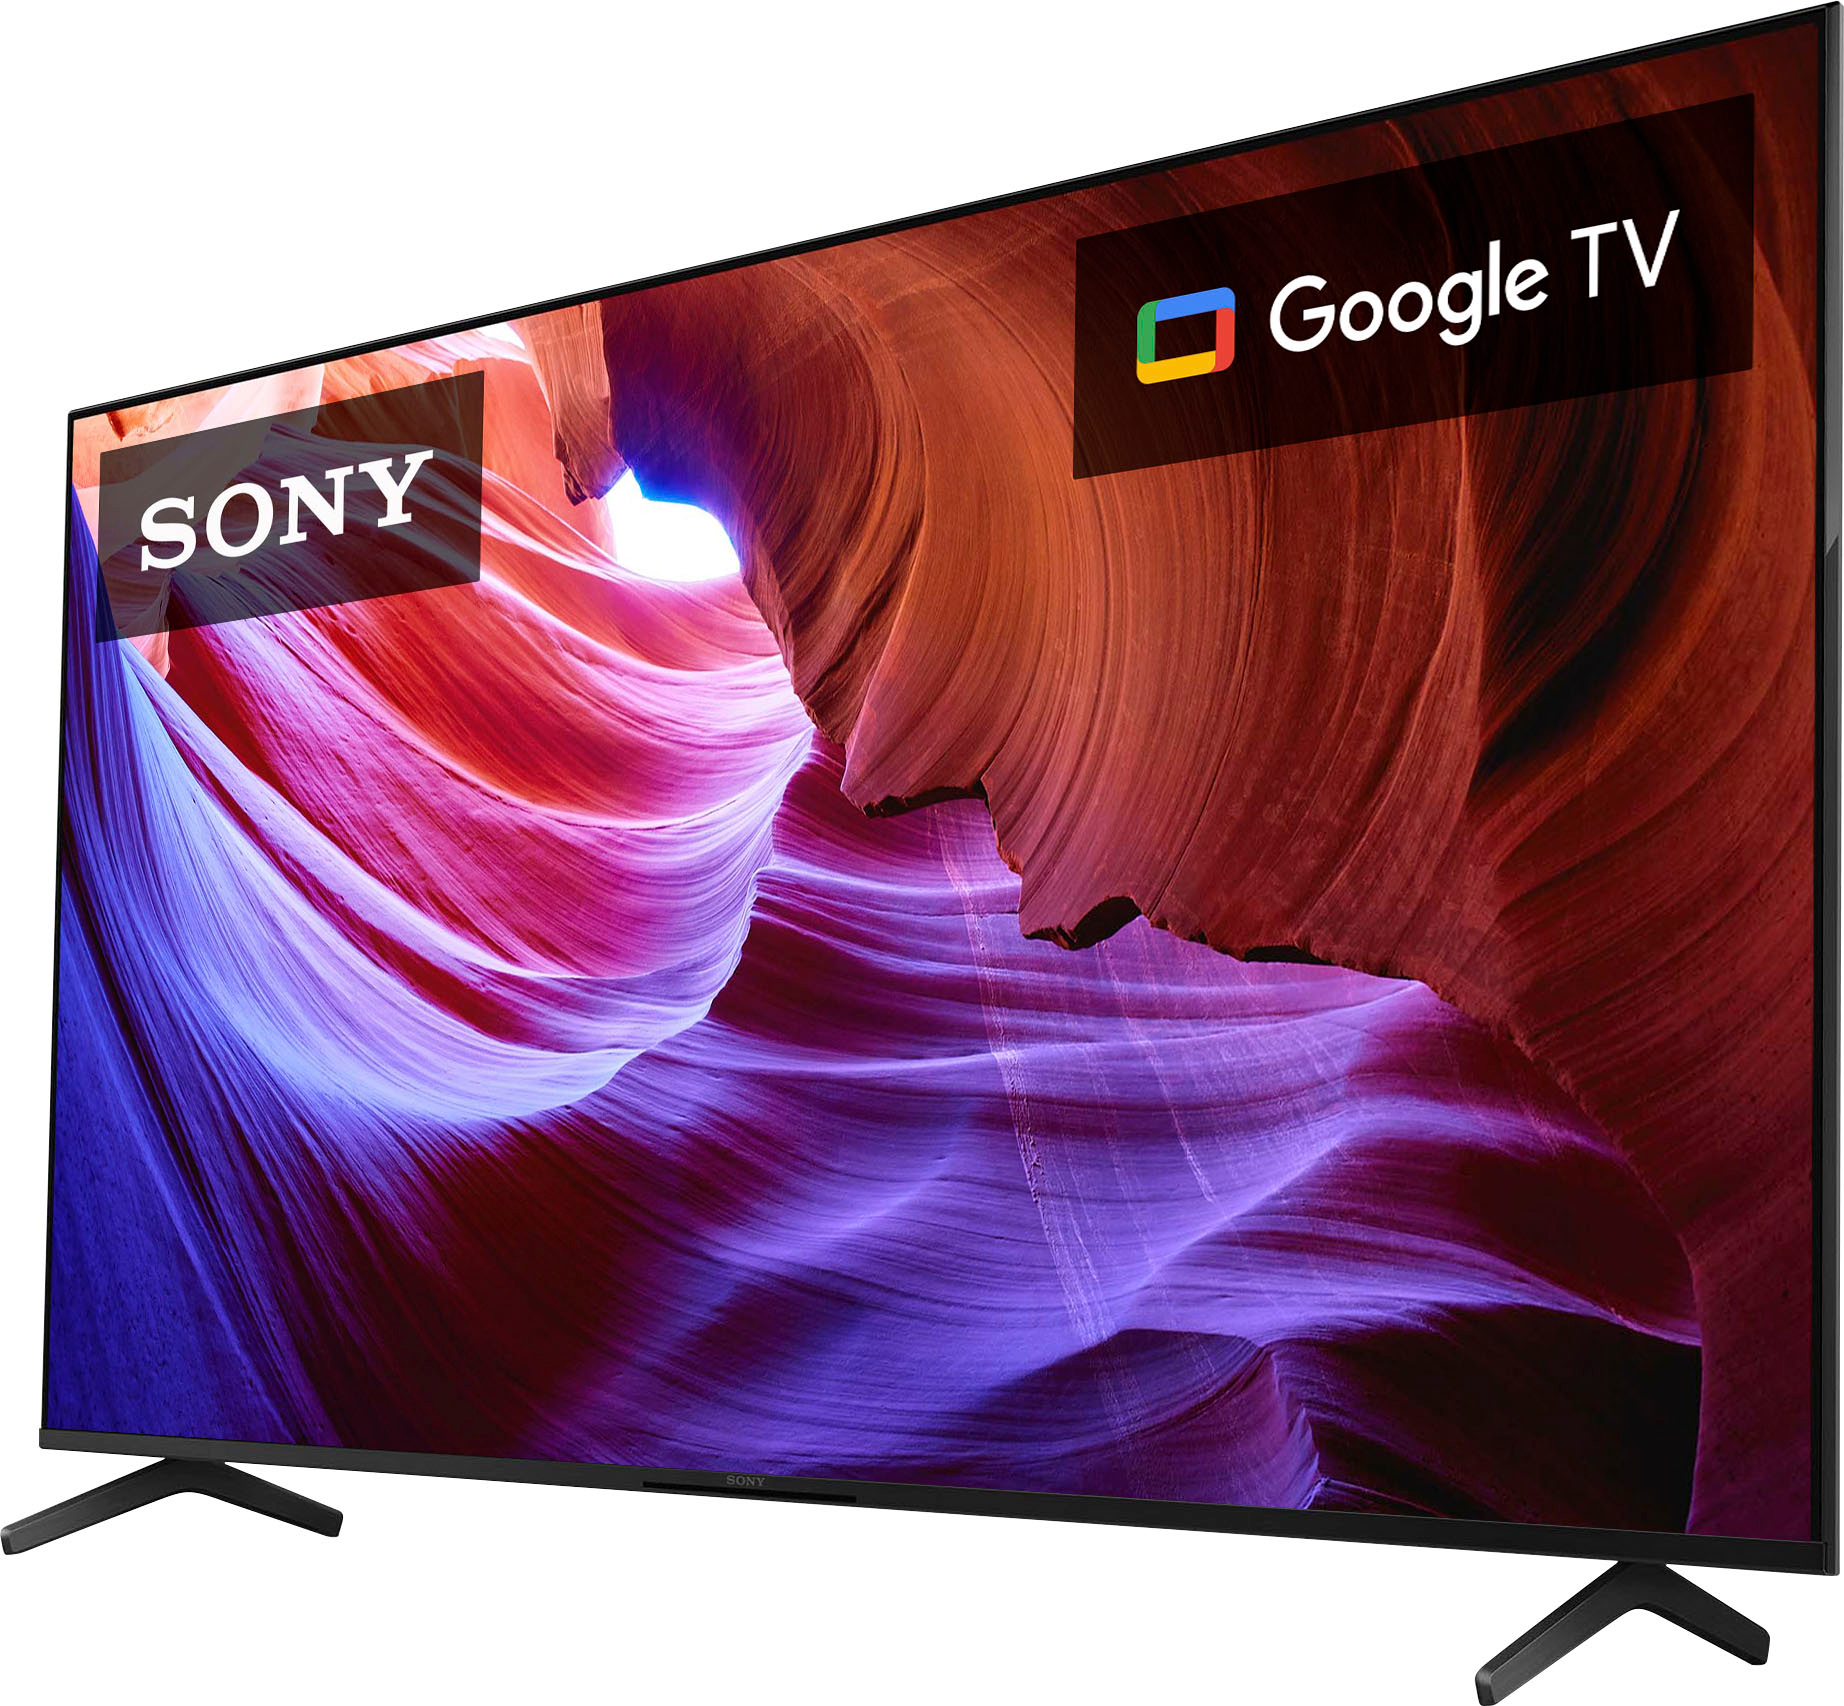  Sony 43 Inch 4K Ultra HD TV X85K Series: LED Smart Google TV(Bluetooth,  Wi-Fi, USB, Ethernet, HDMI) with Dolby Vision HDR and Native 120HZ Refresh  Rate KD43X85K- 2022 Model, Black